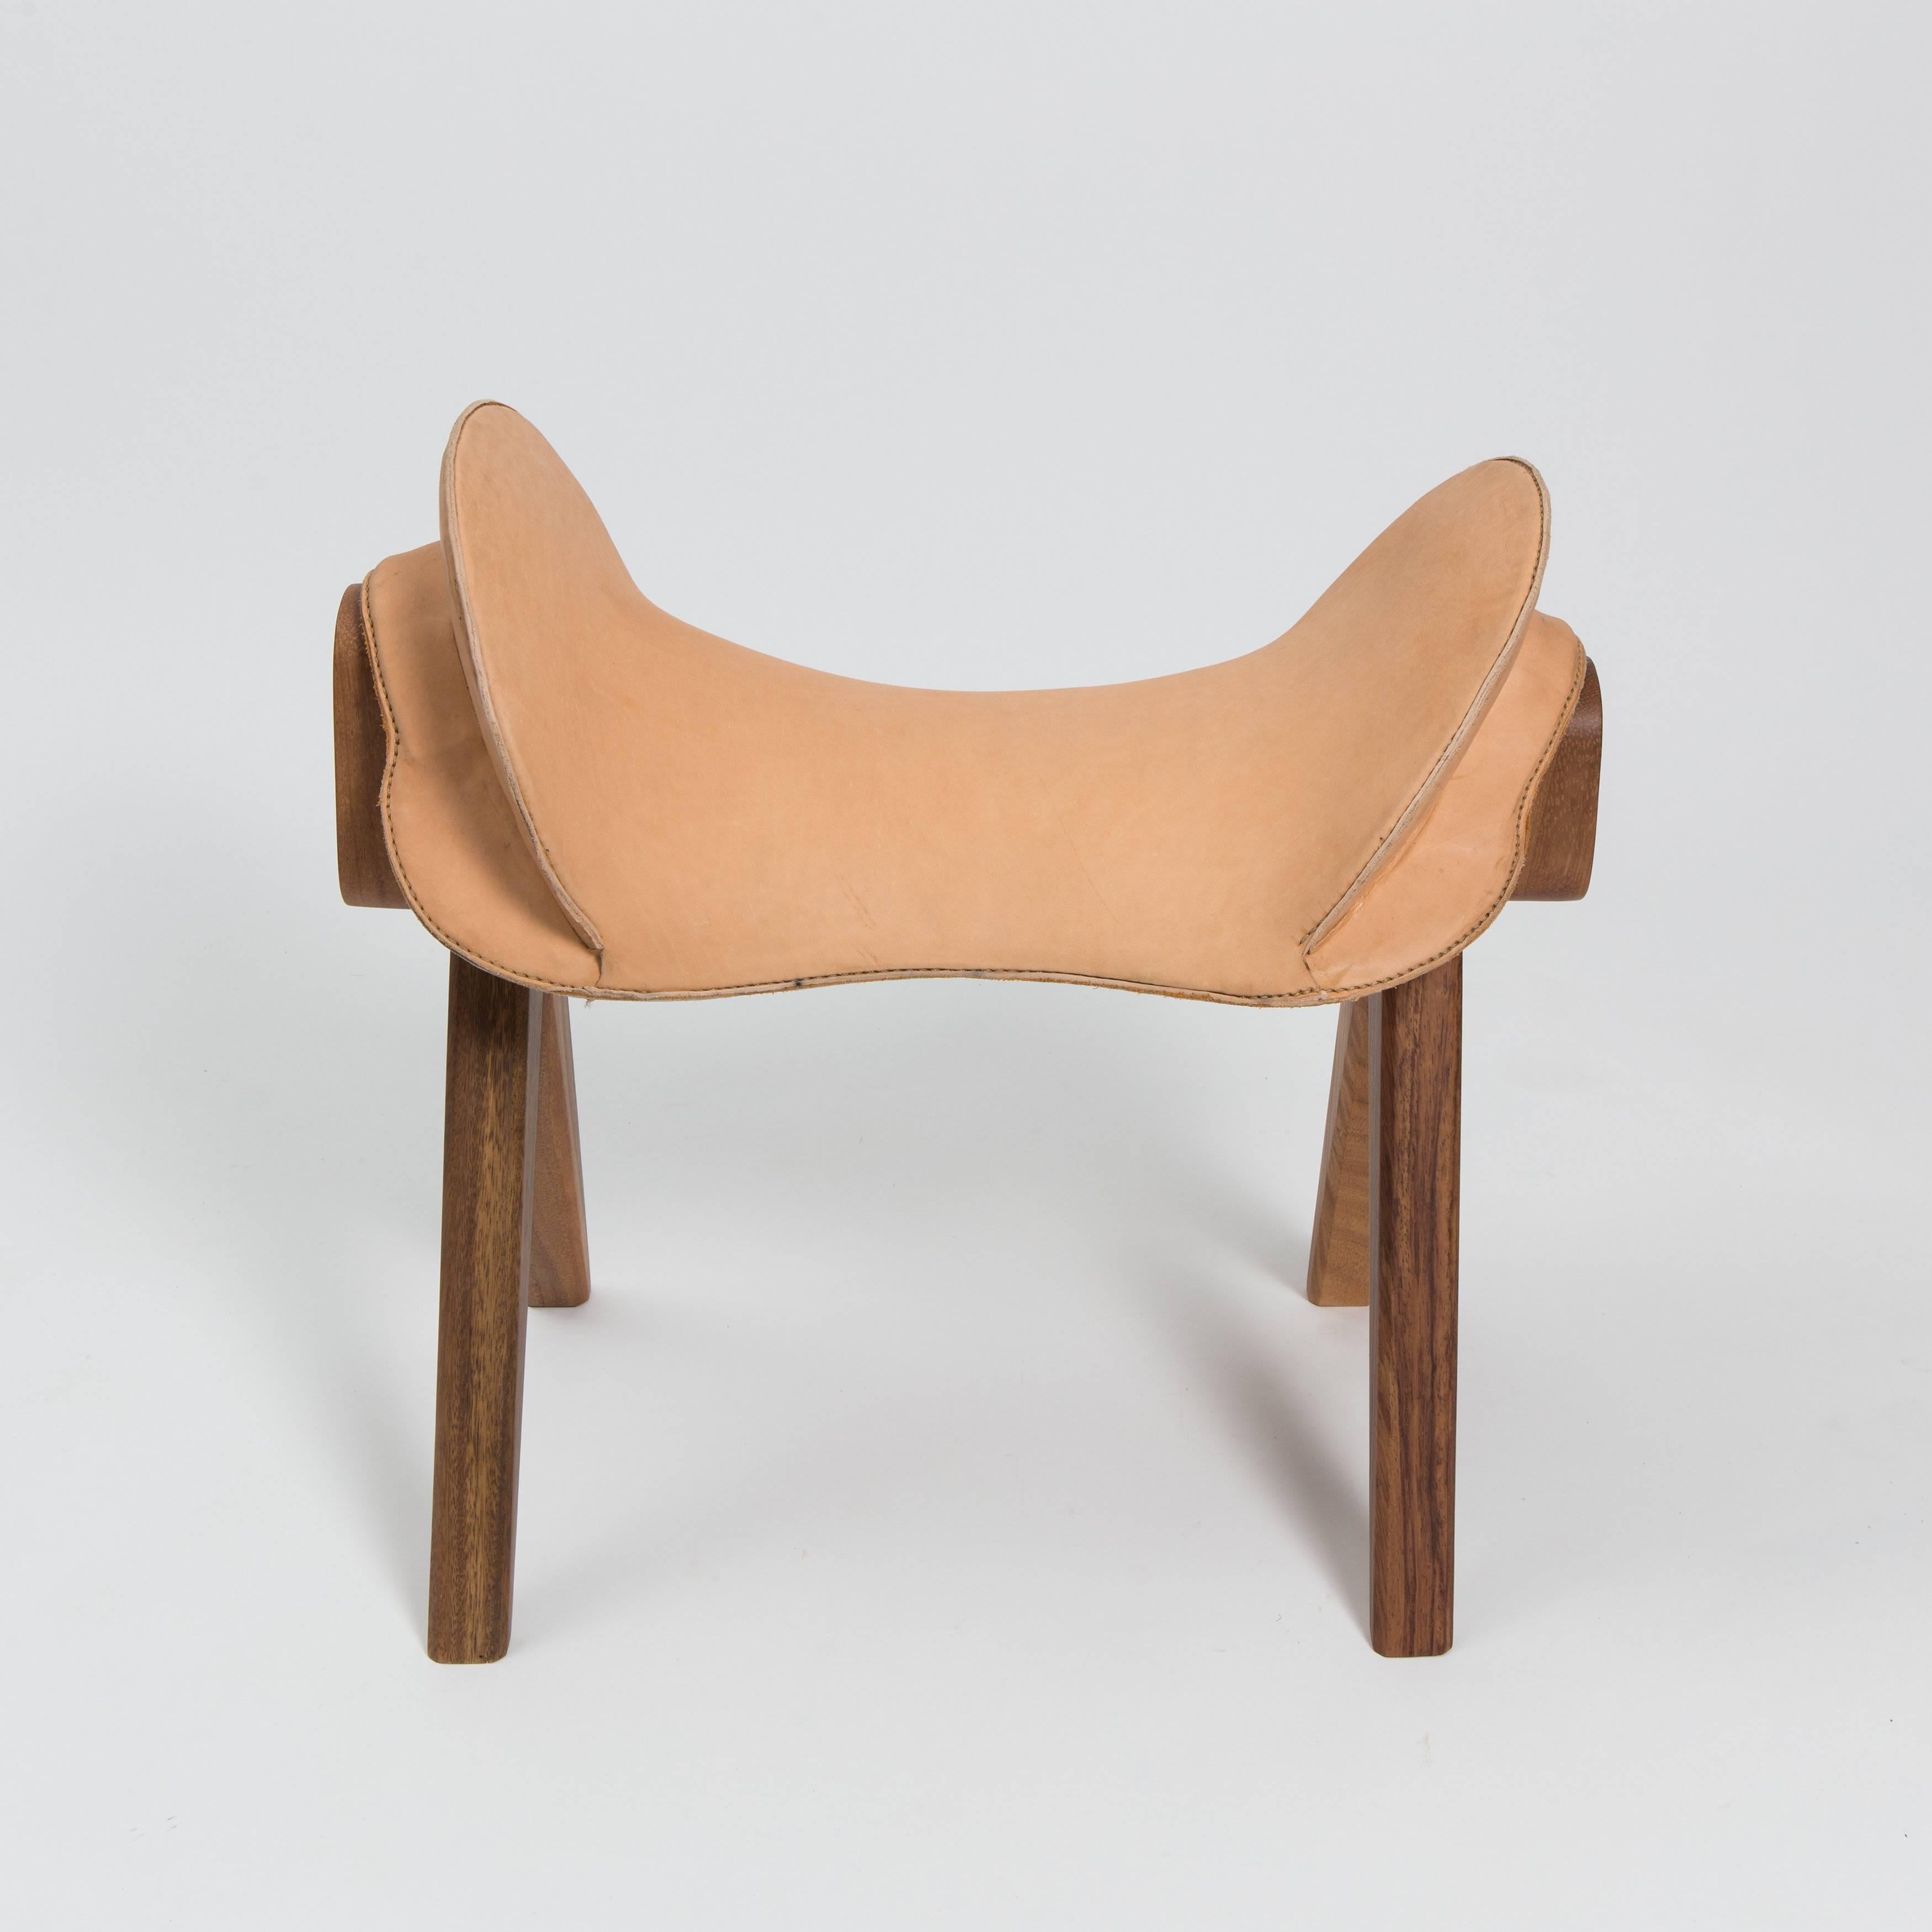 Saddle stool by Gabriela Valenzuela-Hirsch. Hand-stitched natural leather seat on solid carved guanacaste frame. Made exclusively for reGeneration for a show entitled “Two Mundos” which is currently on view.